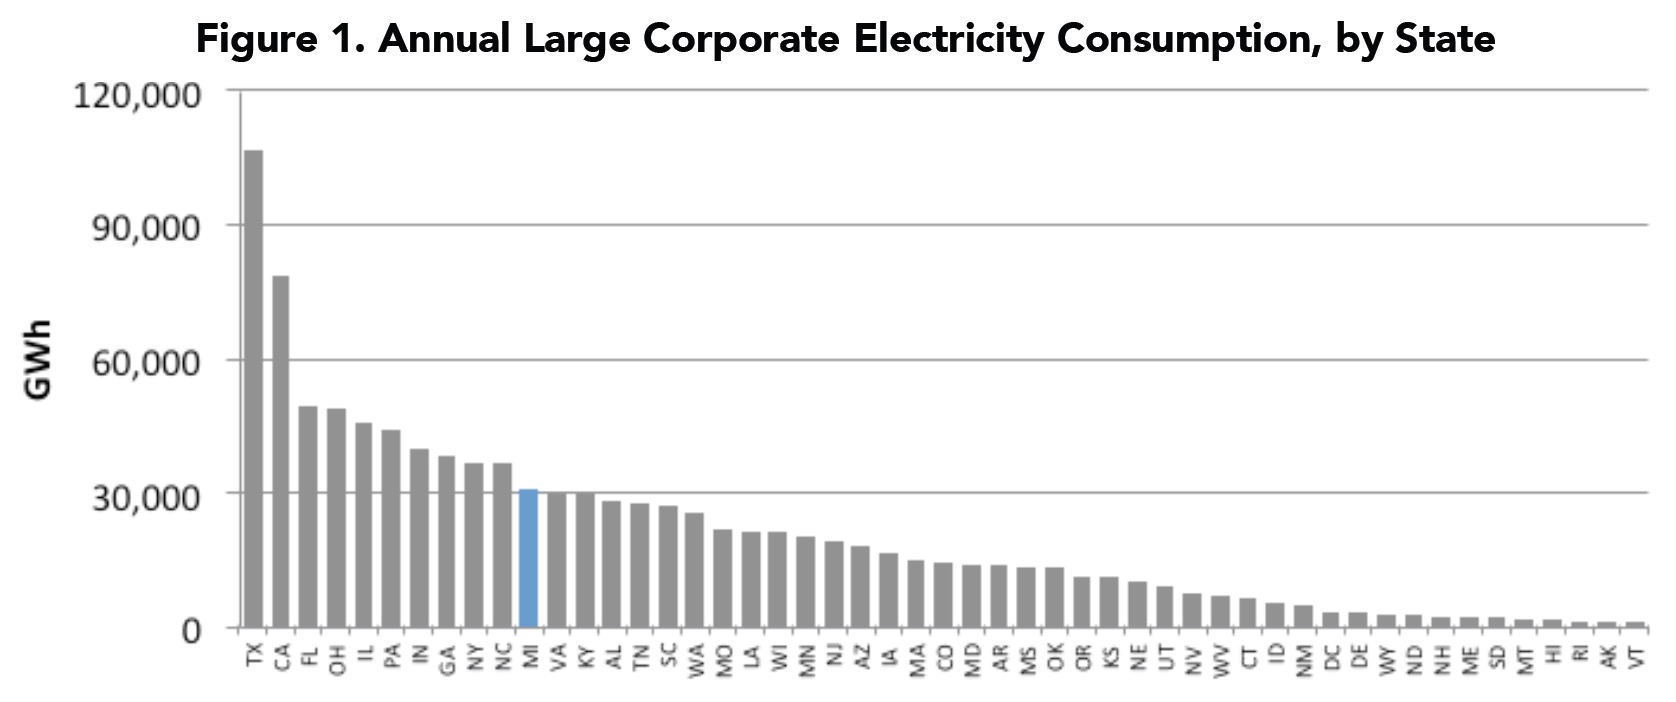 Figure 1. Annual Large Corporate Electricity Consumption, by State